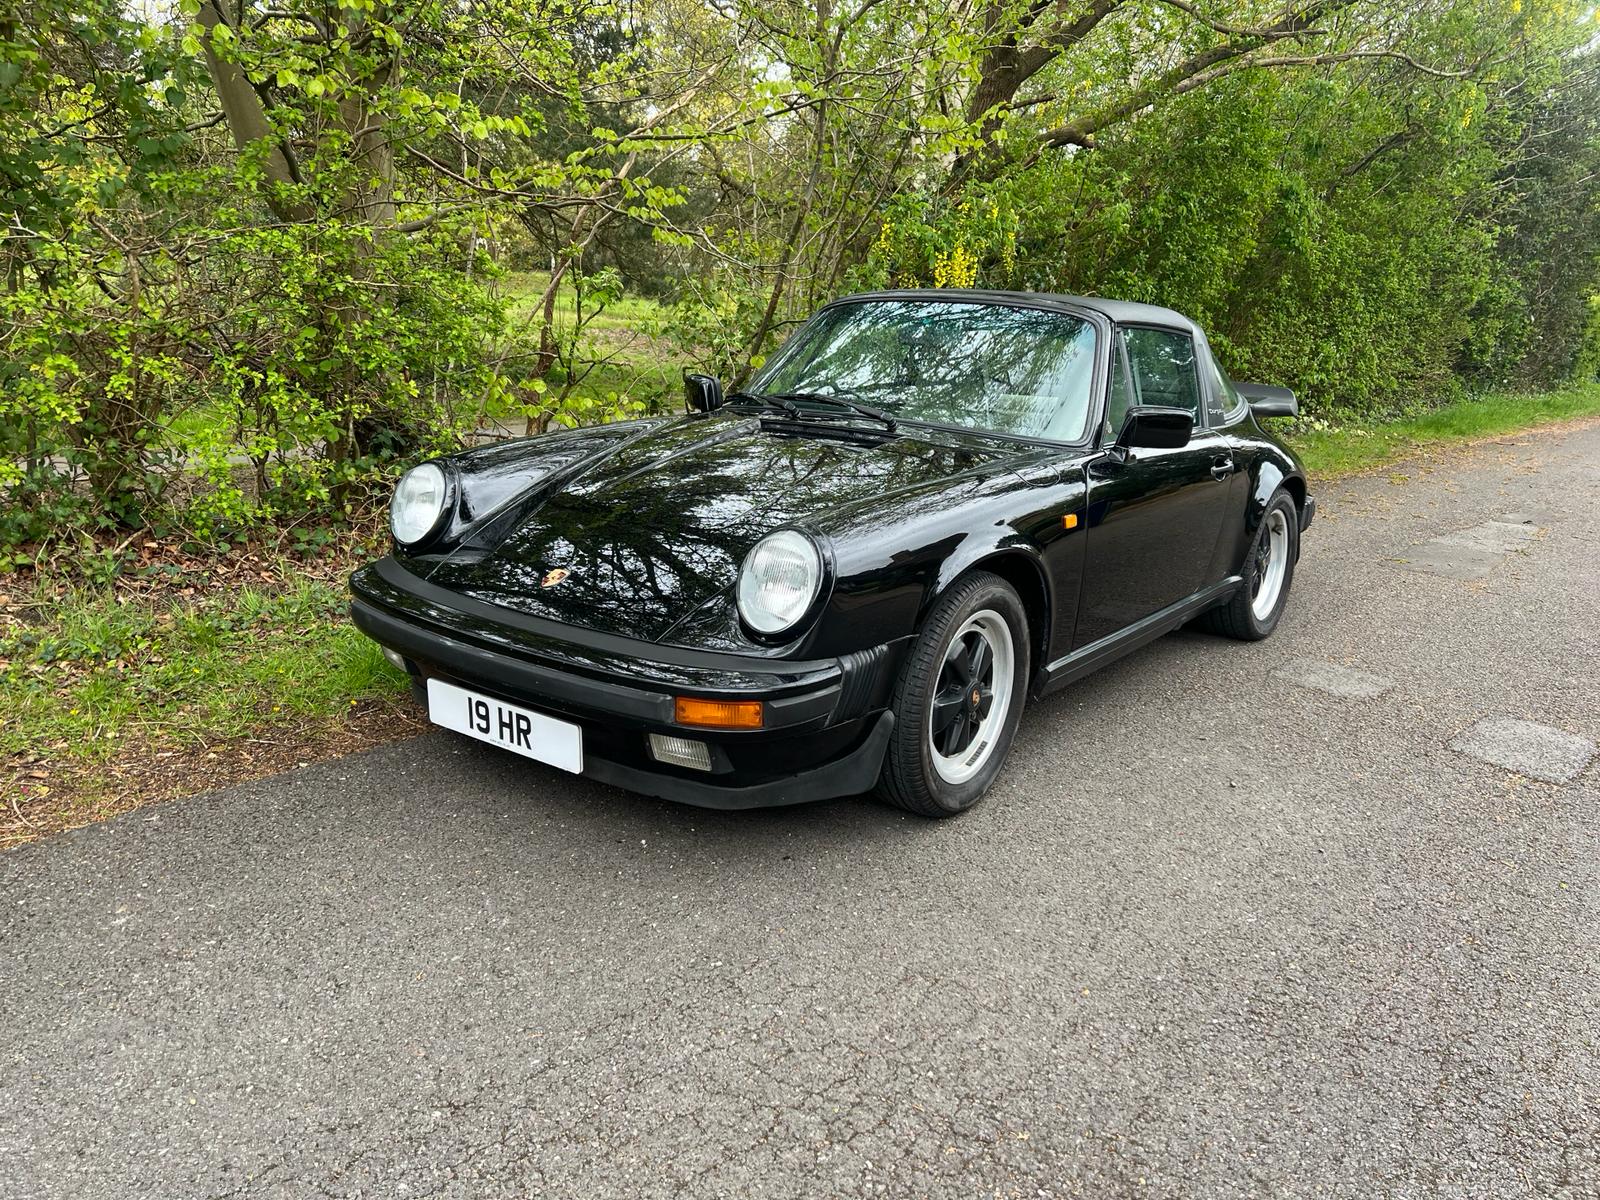 1988 Porsche Carrera Targa 3.2 - 27 yrs ownership, 61,000 miles with only 3500 miles in last 25 yrs - Image 4 of 18